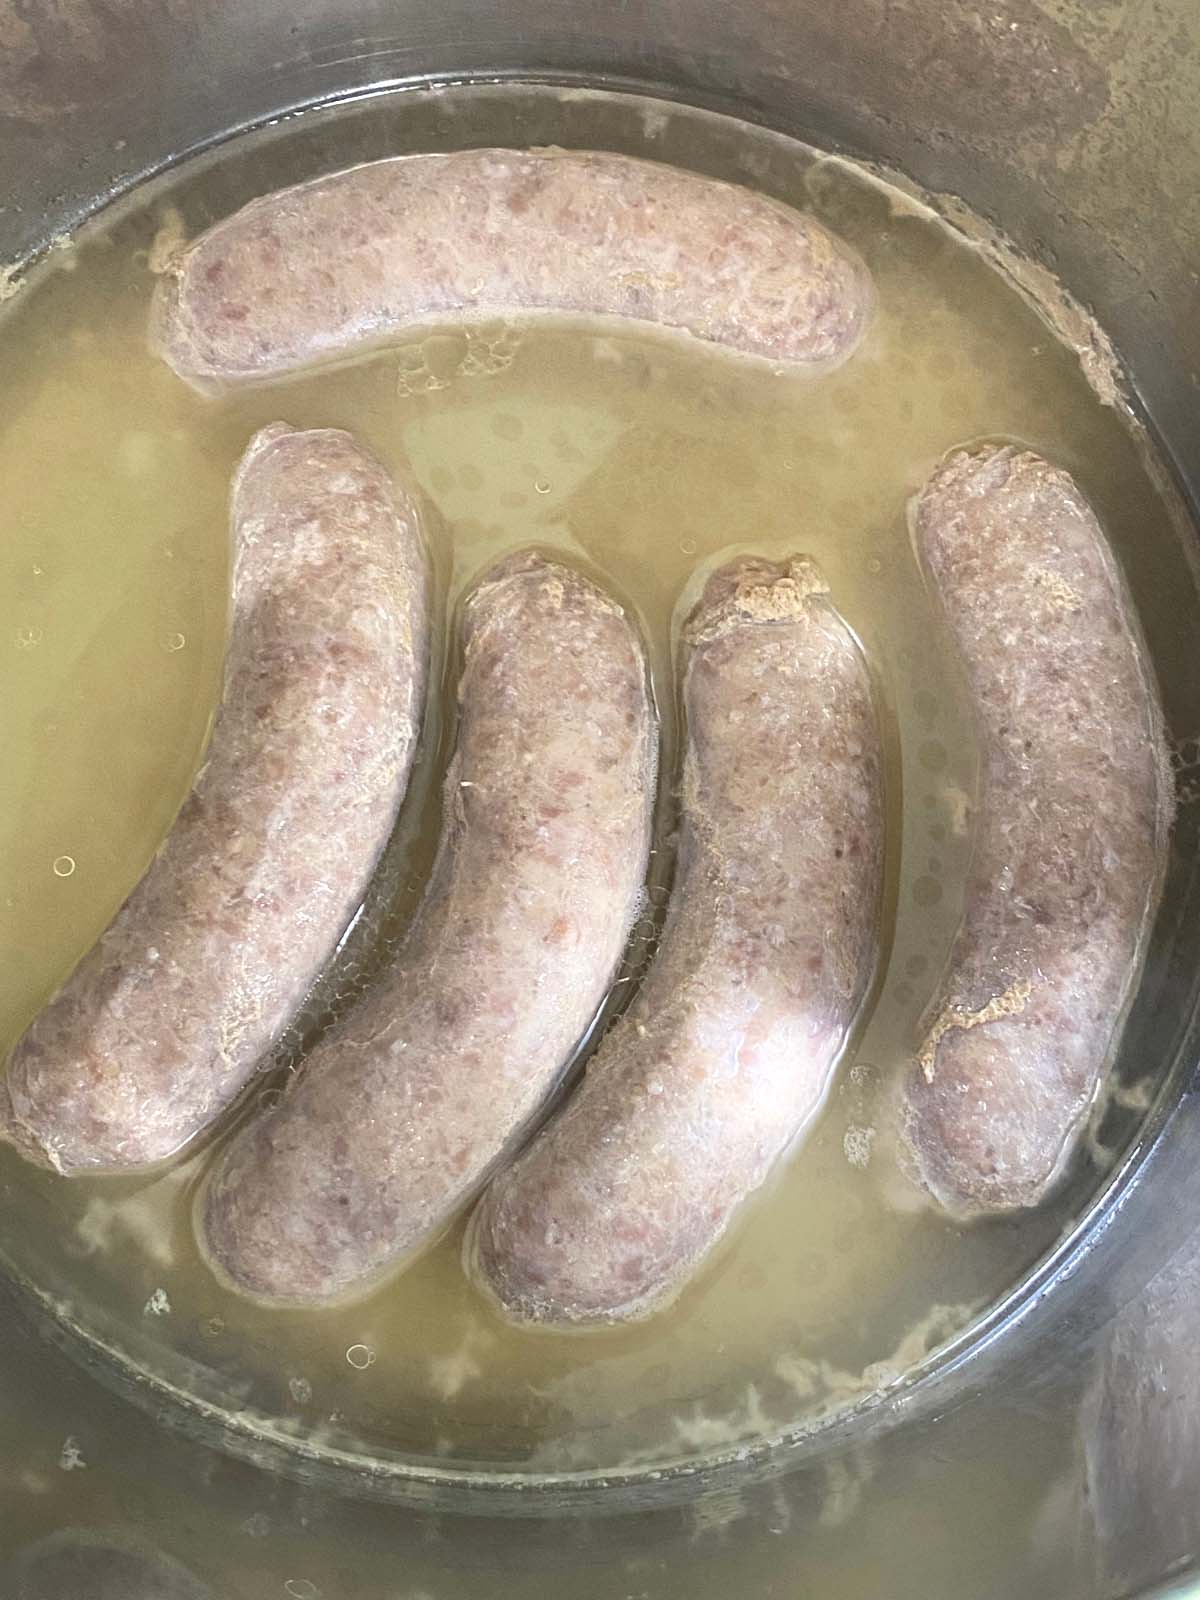 5 cooked brats in liquid after cooking.